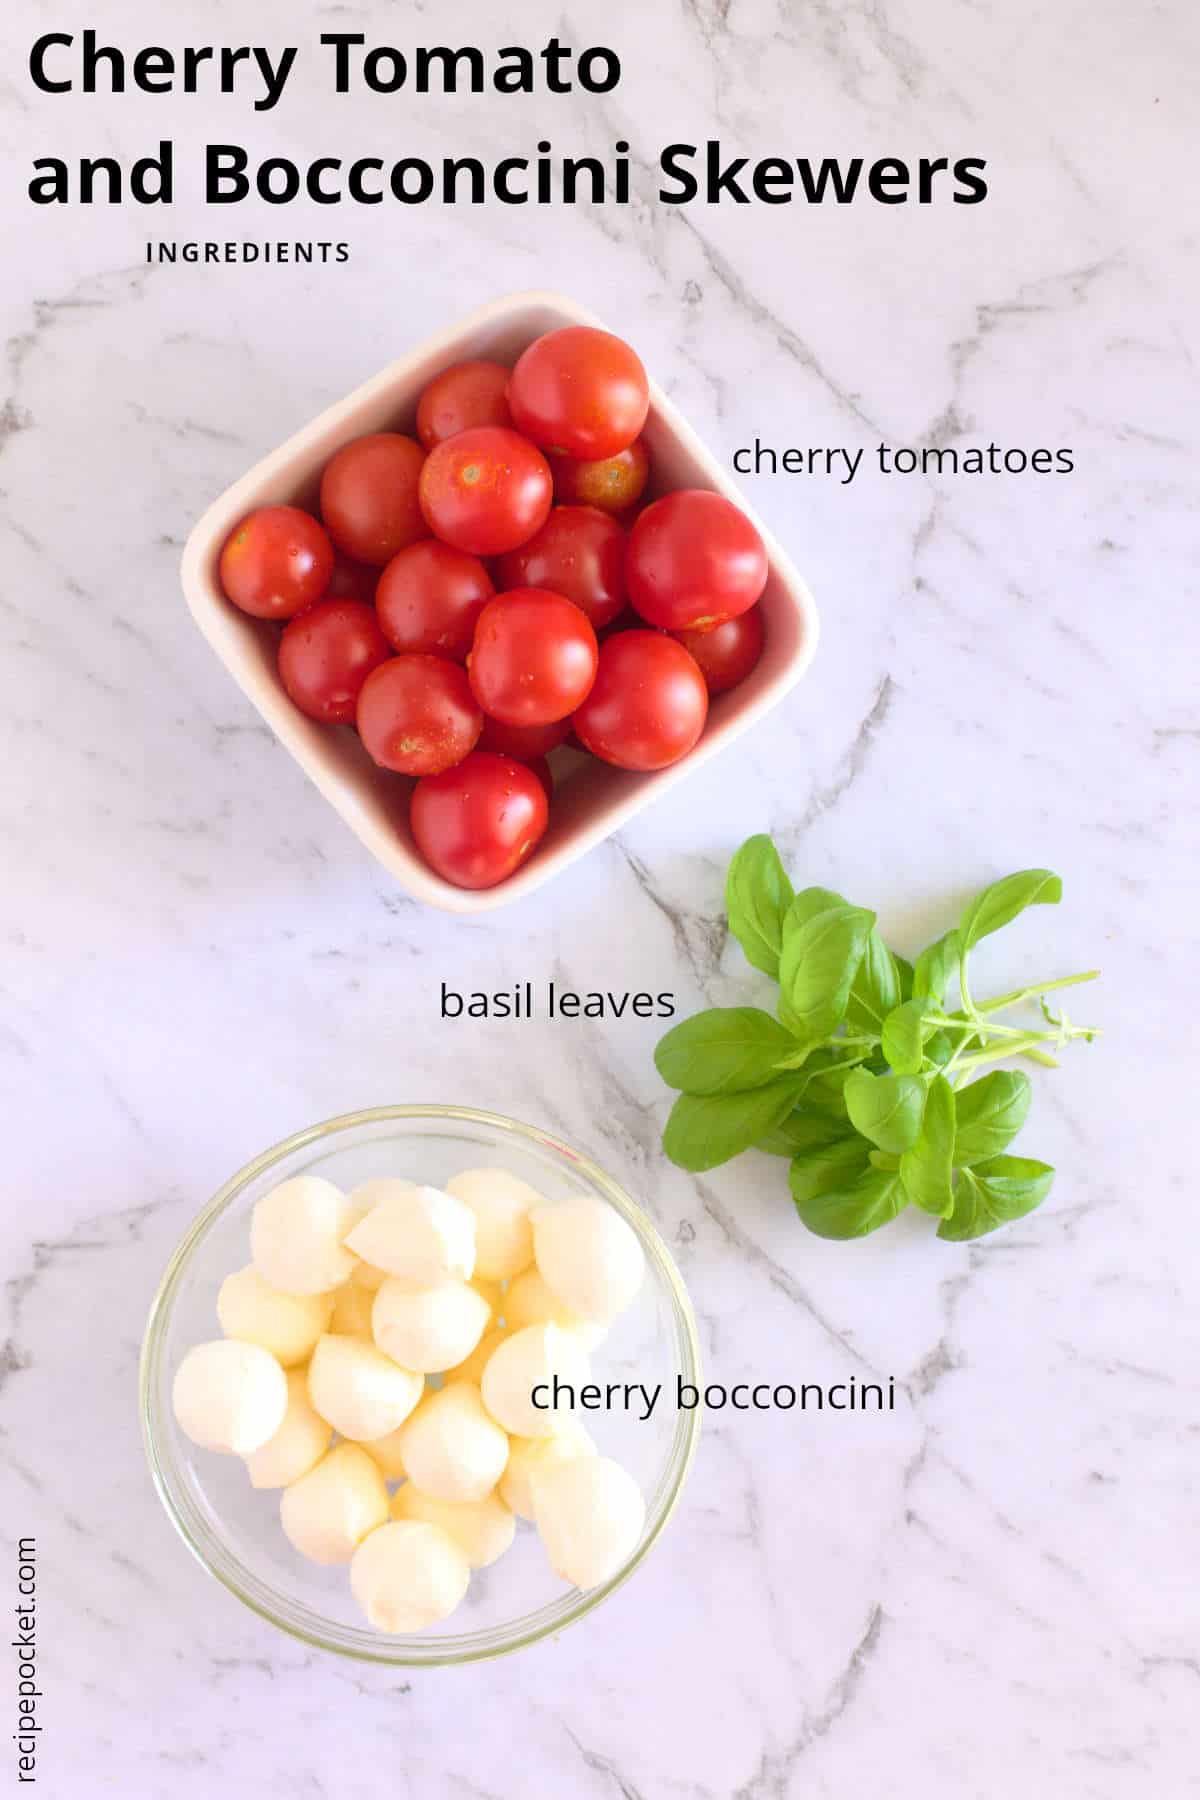 Image showing ingredients needed to make tomato and bocconcini skewers.